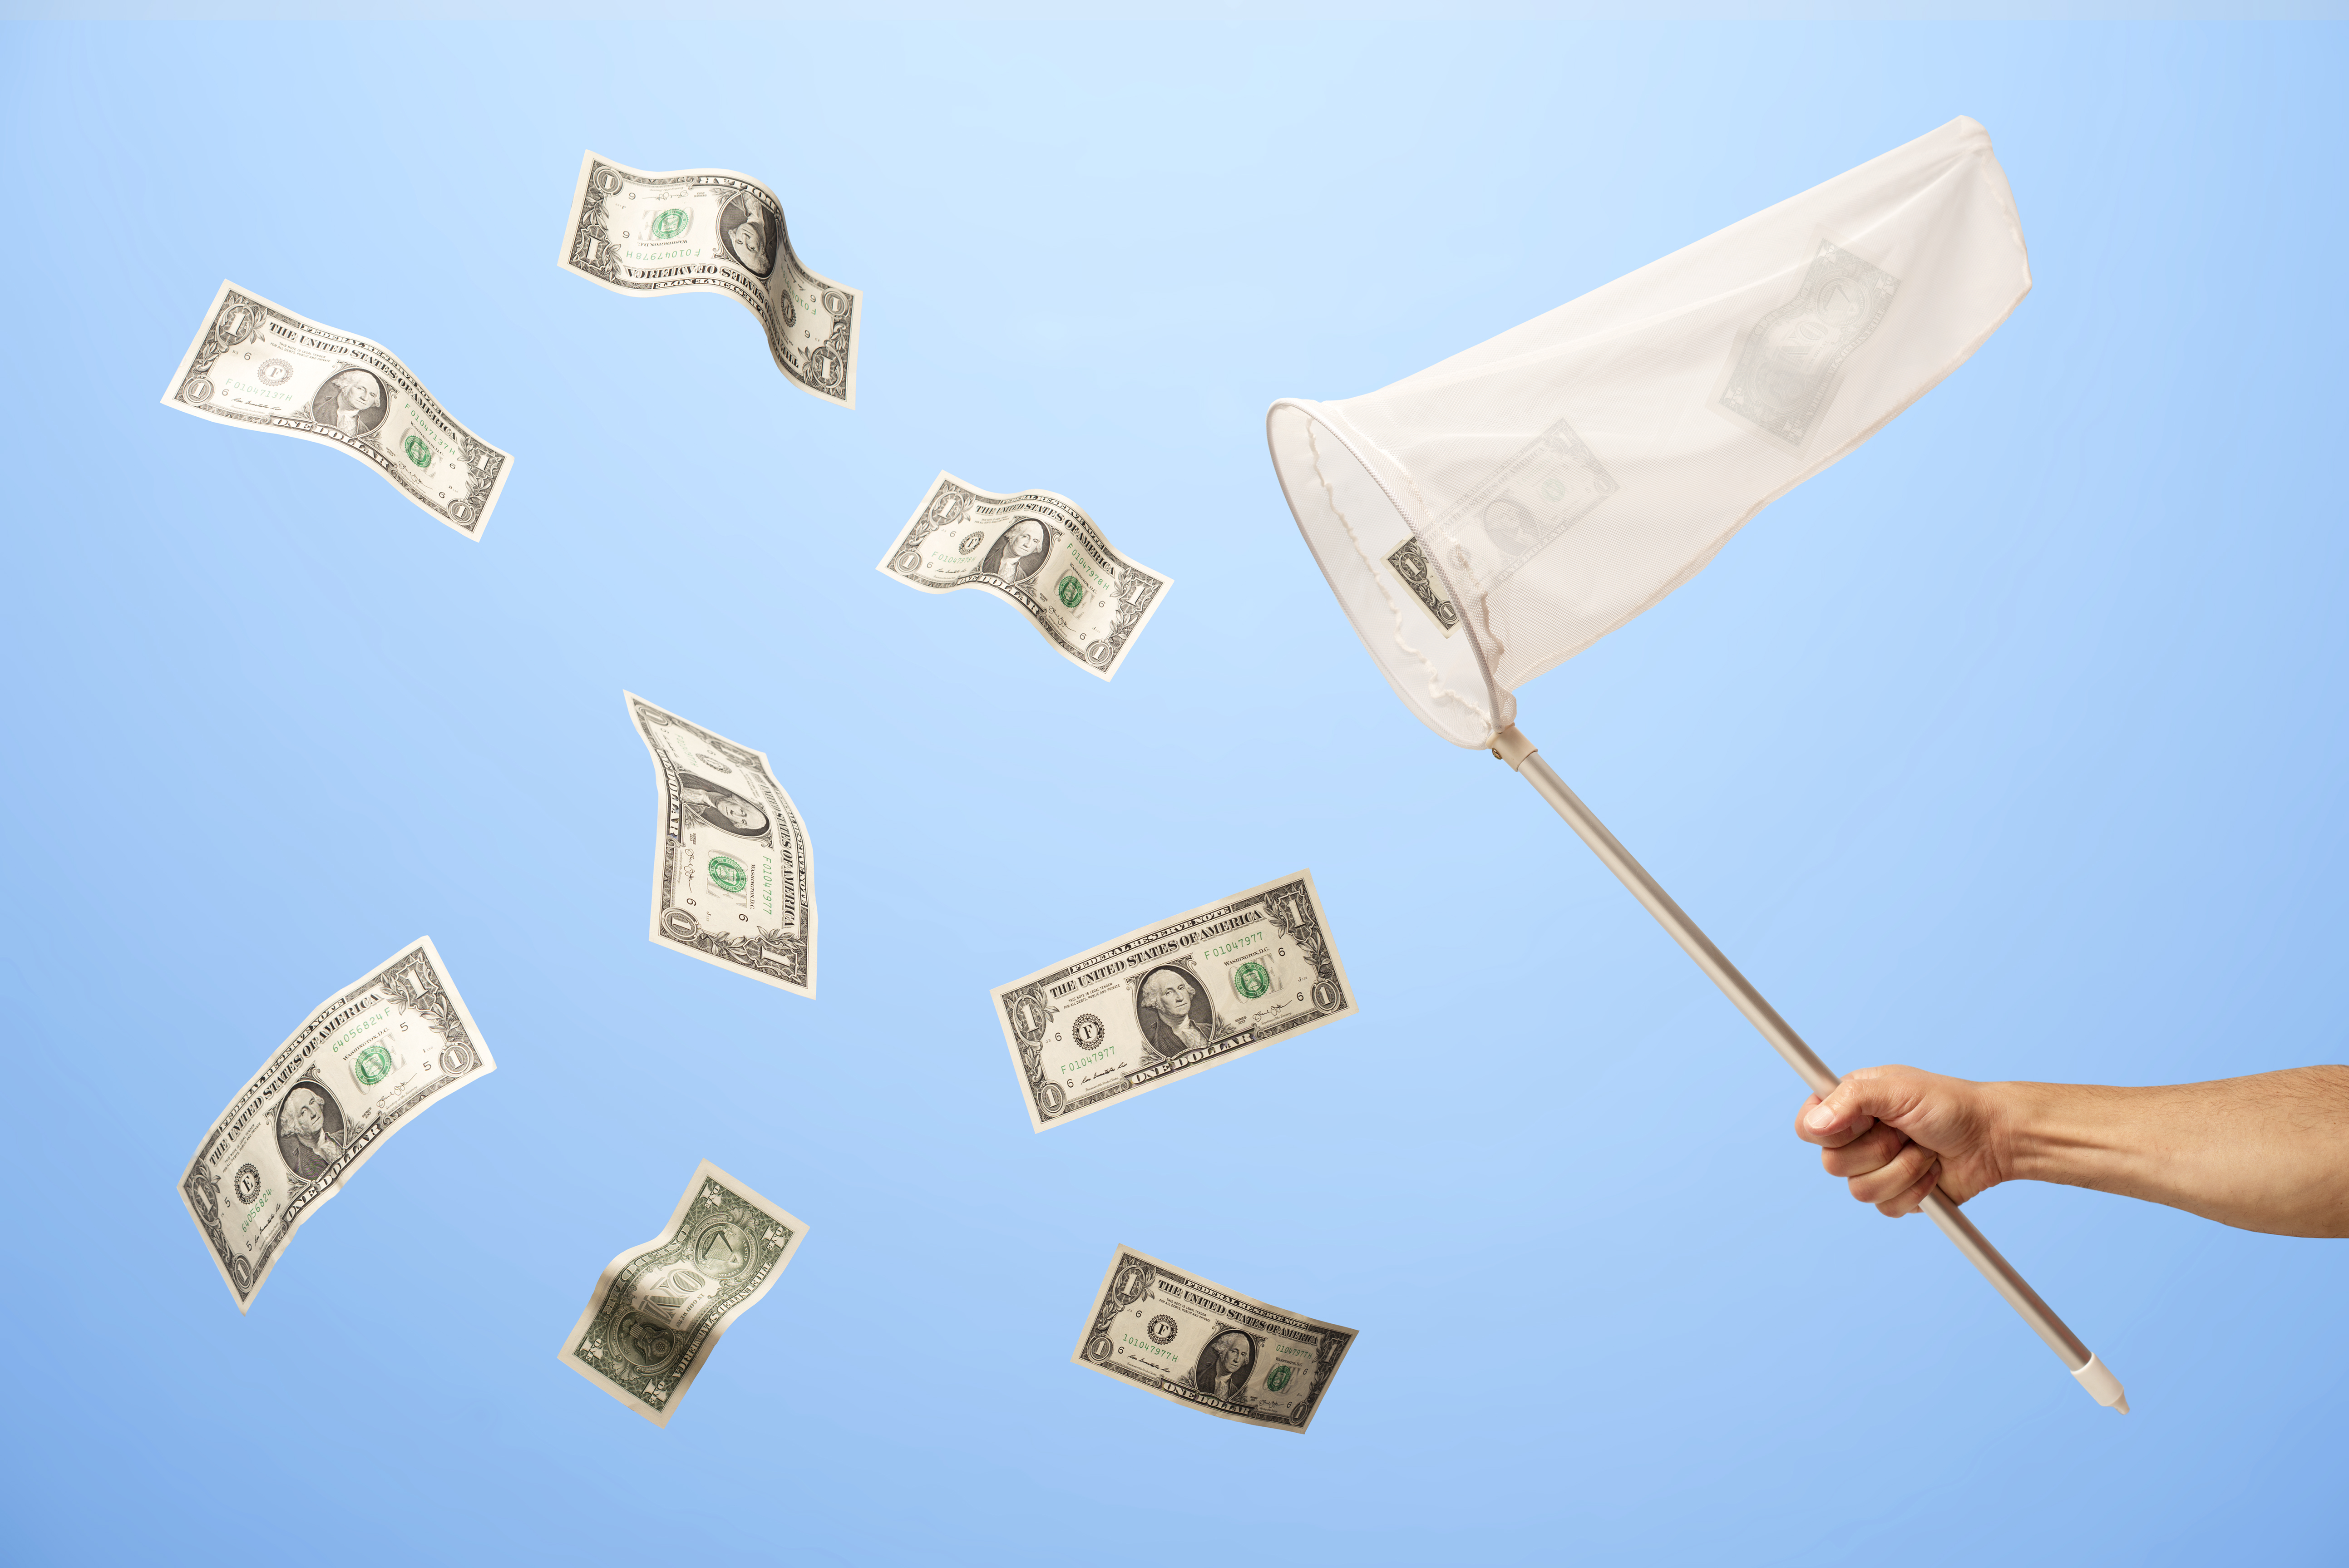 Catching dollar bills with a net;  fundraising in a turbulent market